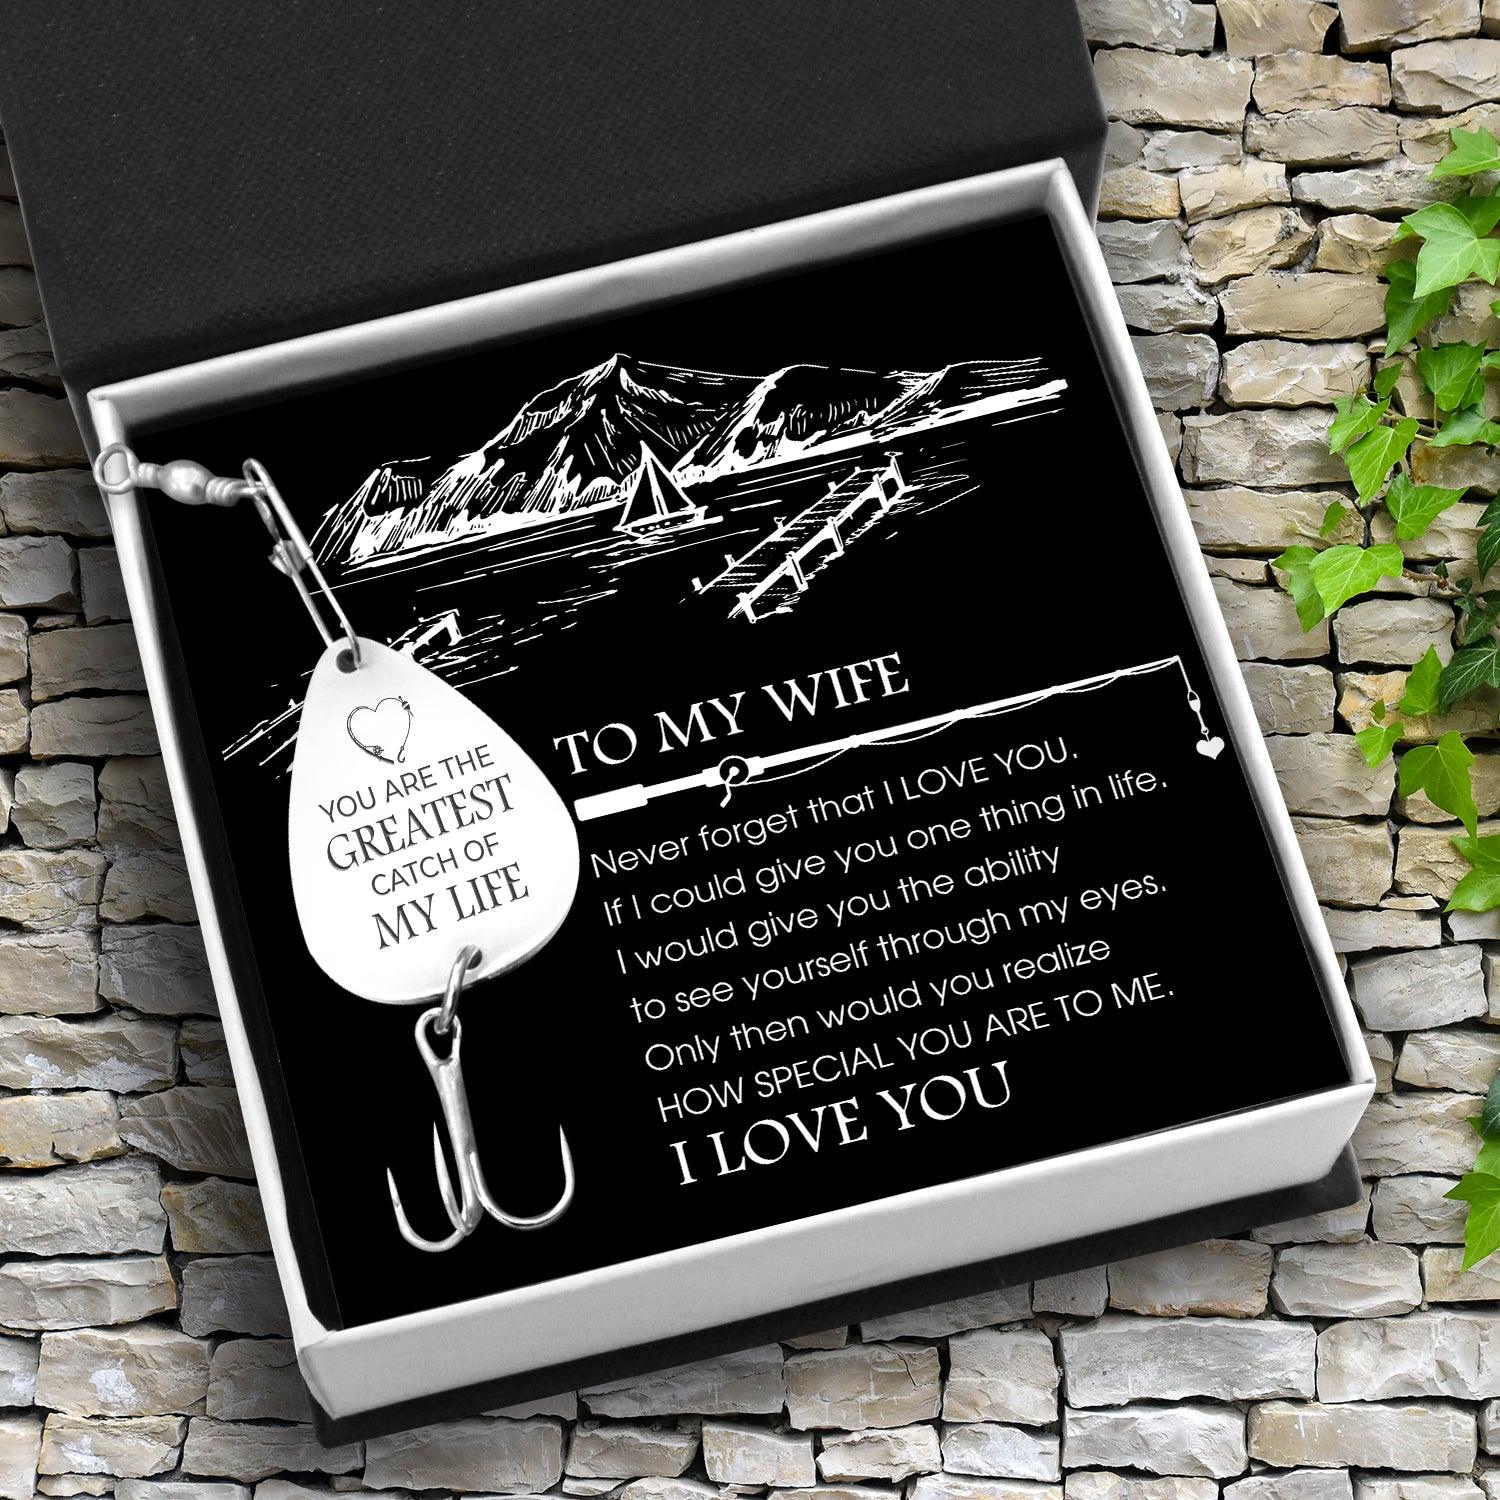 Personalised Engraved Fishing Hook - To My Wife - Never Forget That I Love You - Augfa15003 - Gifts Holder